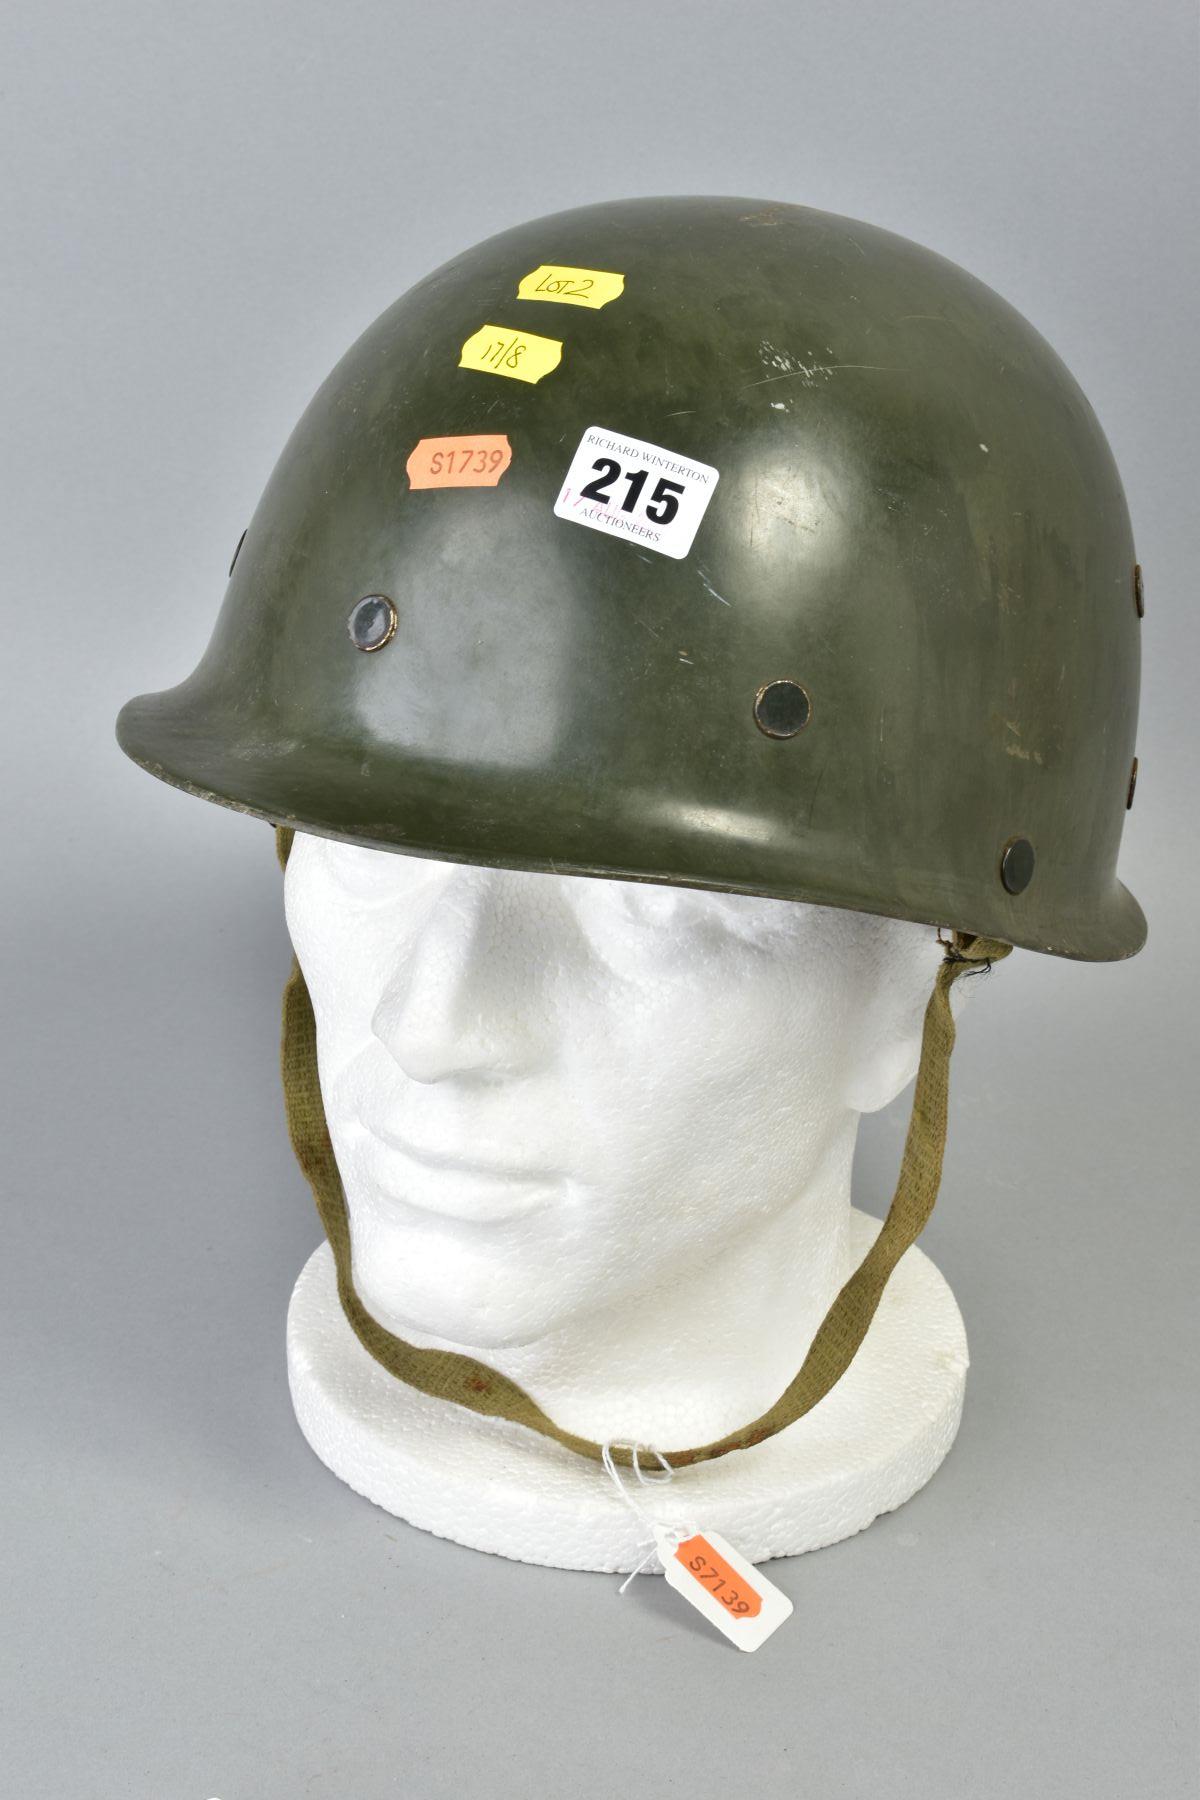 GREEN COLOURED US MILITARY HELMET (M1) but made of resin, with liner chin strap etc, possibly re-